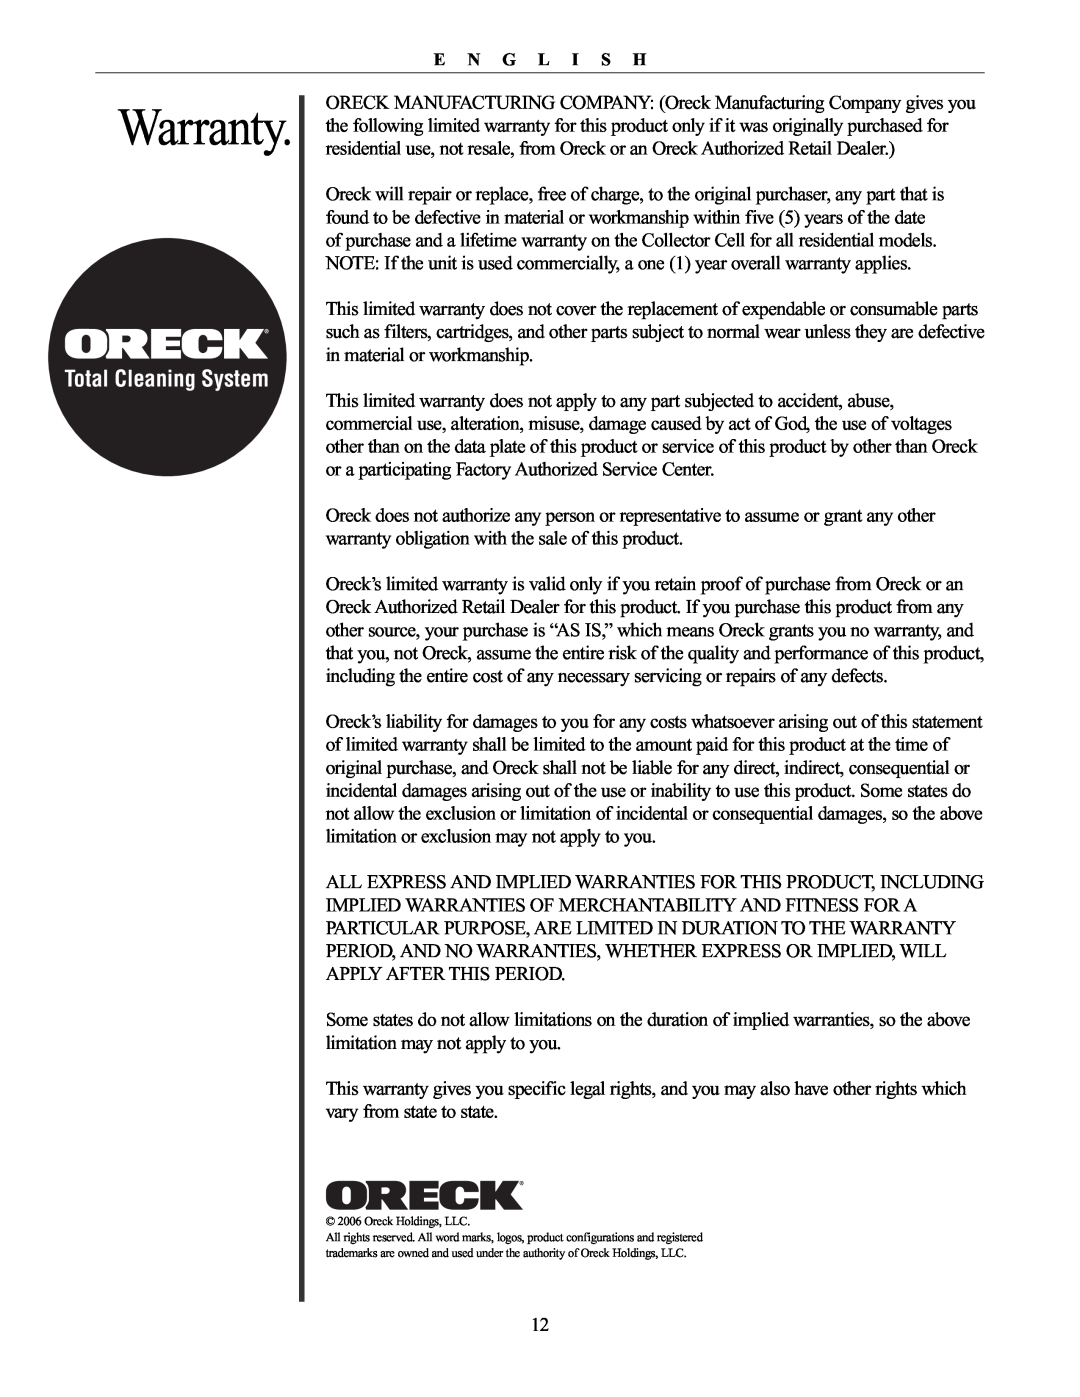 Oreck 20061-01Rev.A manual Warranty, Total Cleaning System 